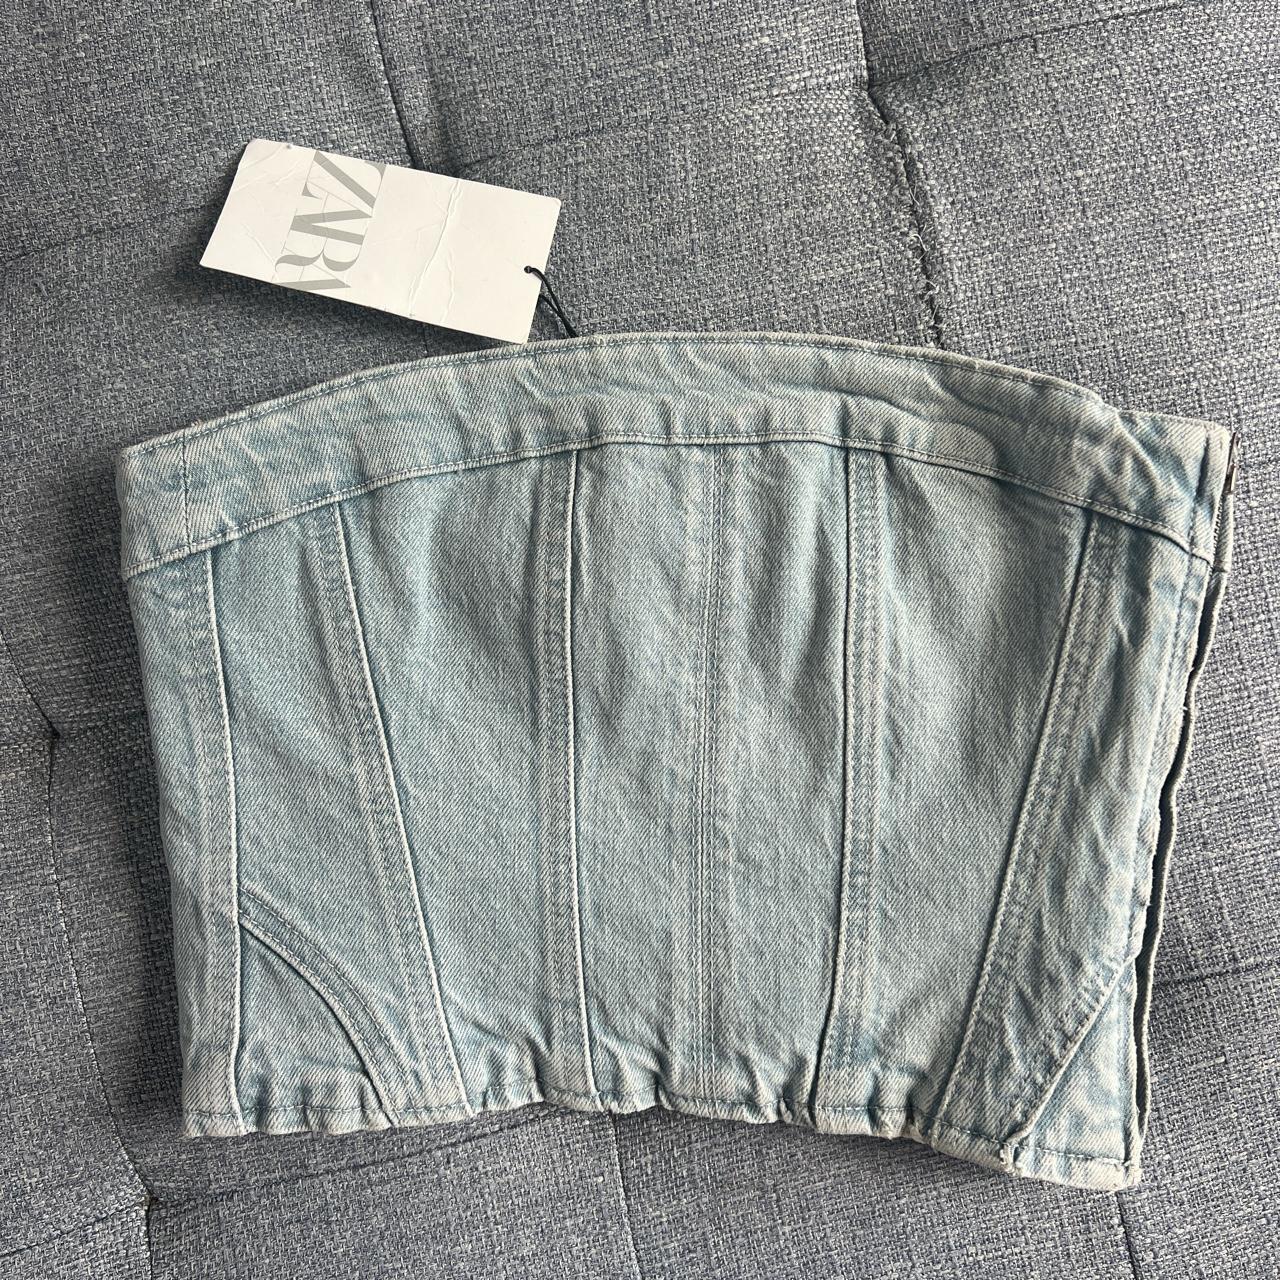 Selling blue corset top from Zara.